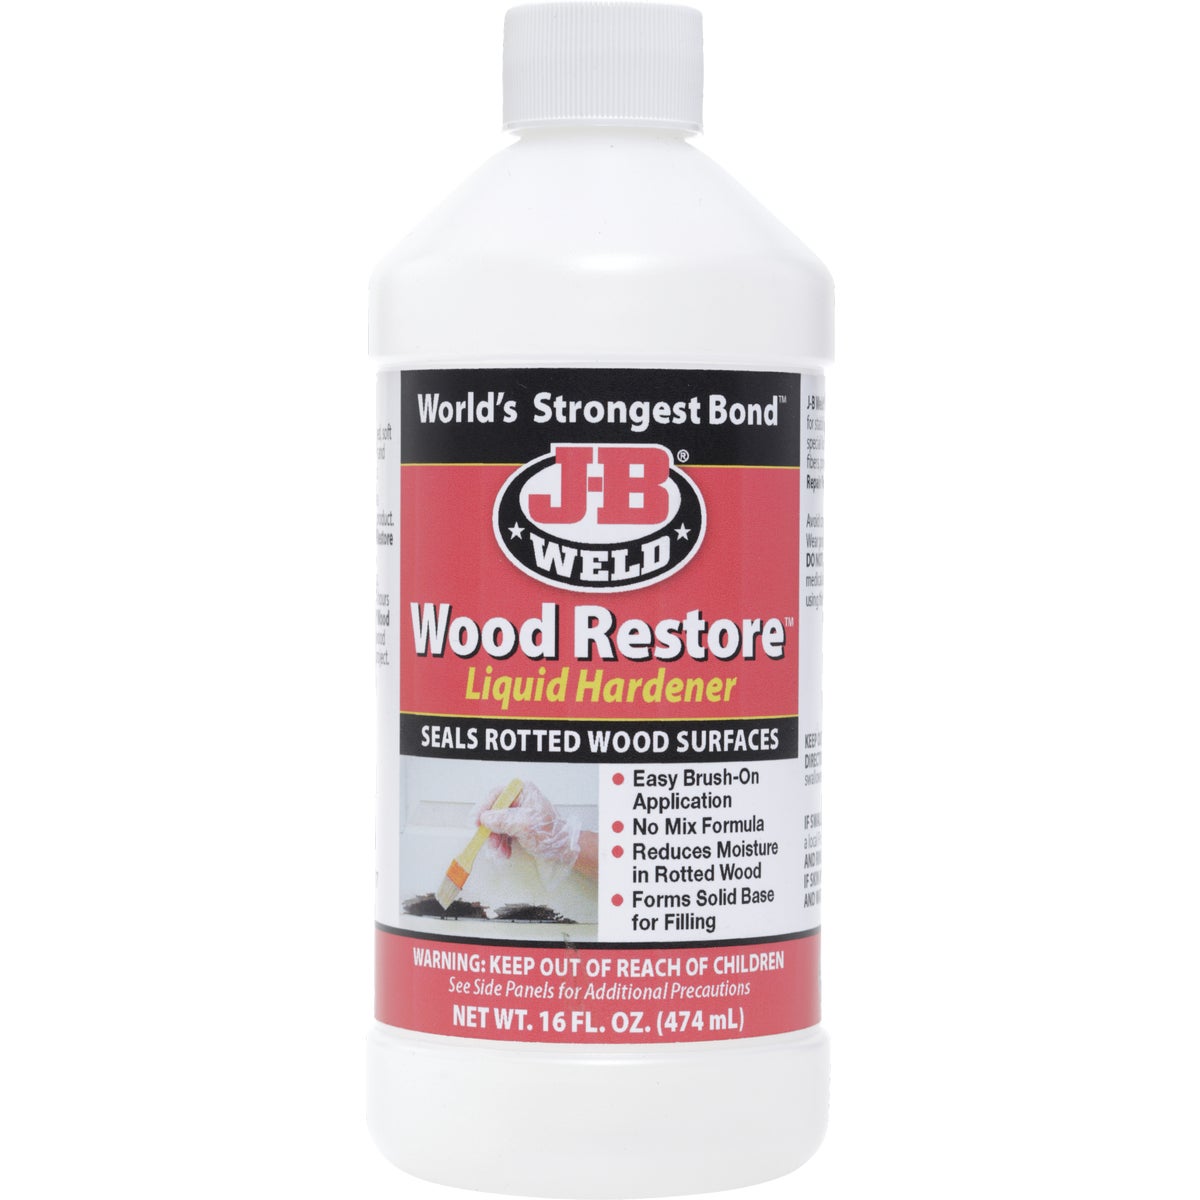 Item 773171, Quick drying liquid hardener for sealing and reinforcing decayed or rotted 